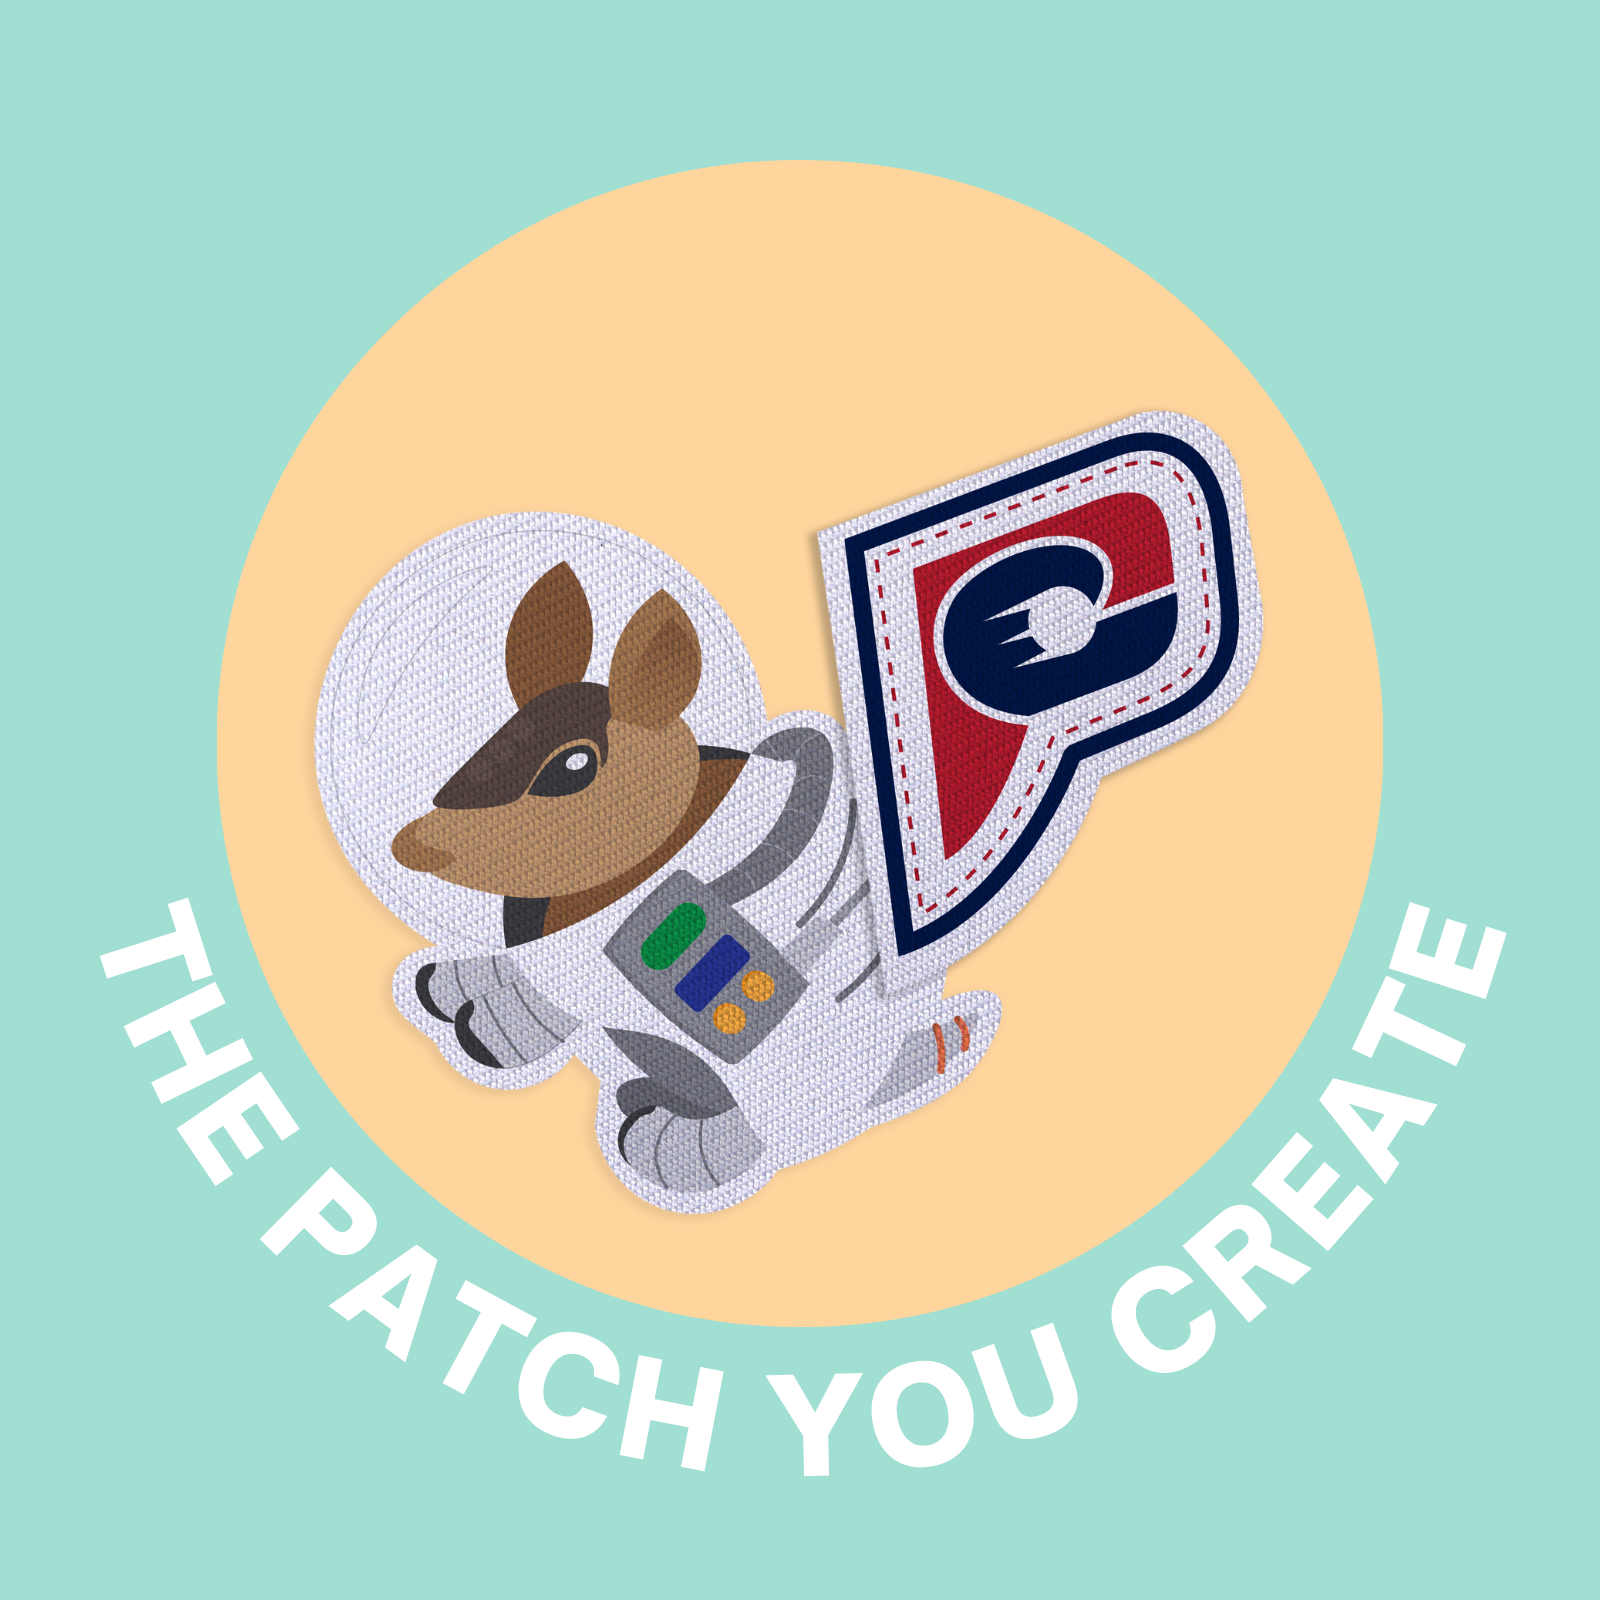 Custom Patches Personalized Discount Printed Patches For Cheap